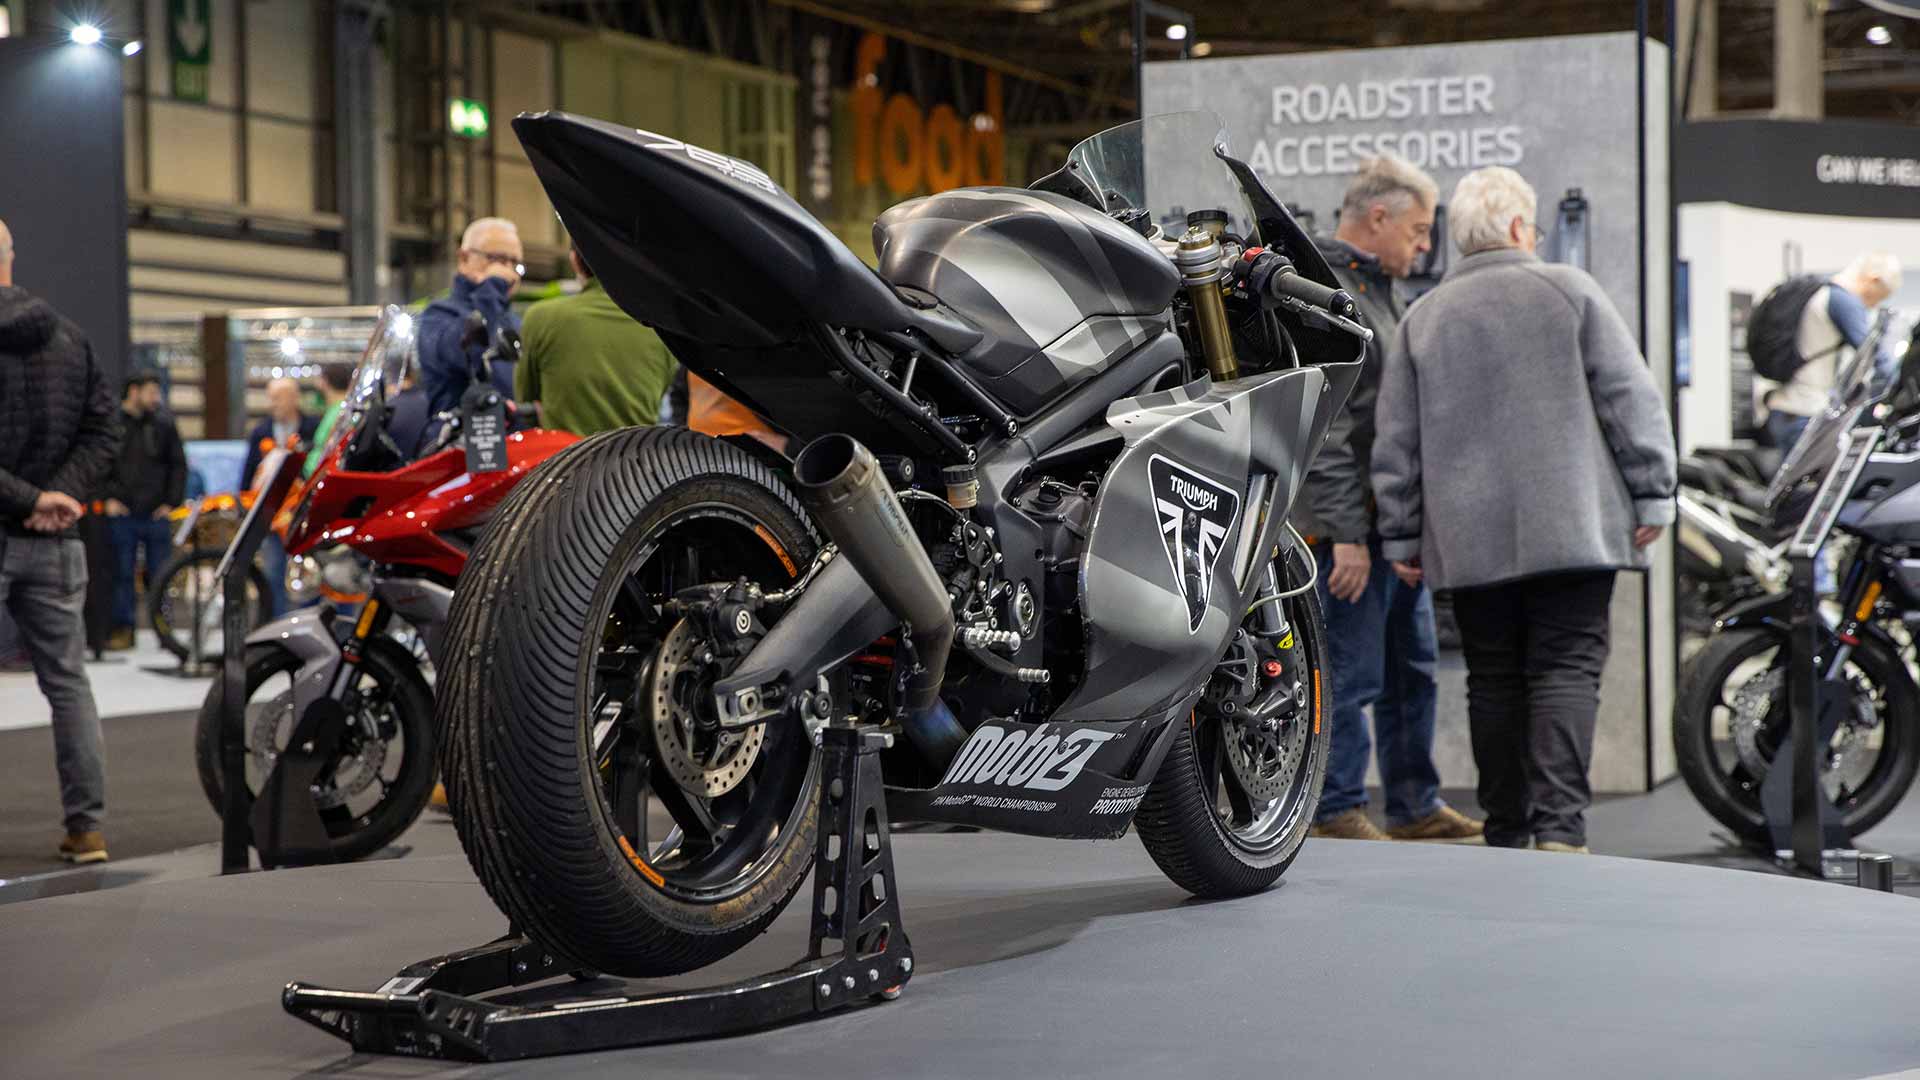 Triumph Motorcycles at Motorcycle Live Moto2 Race Bike